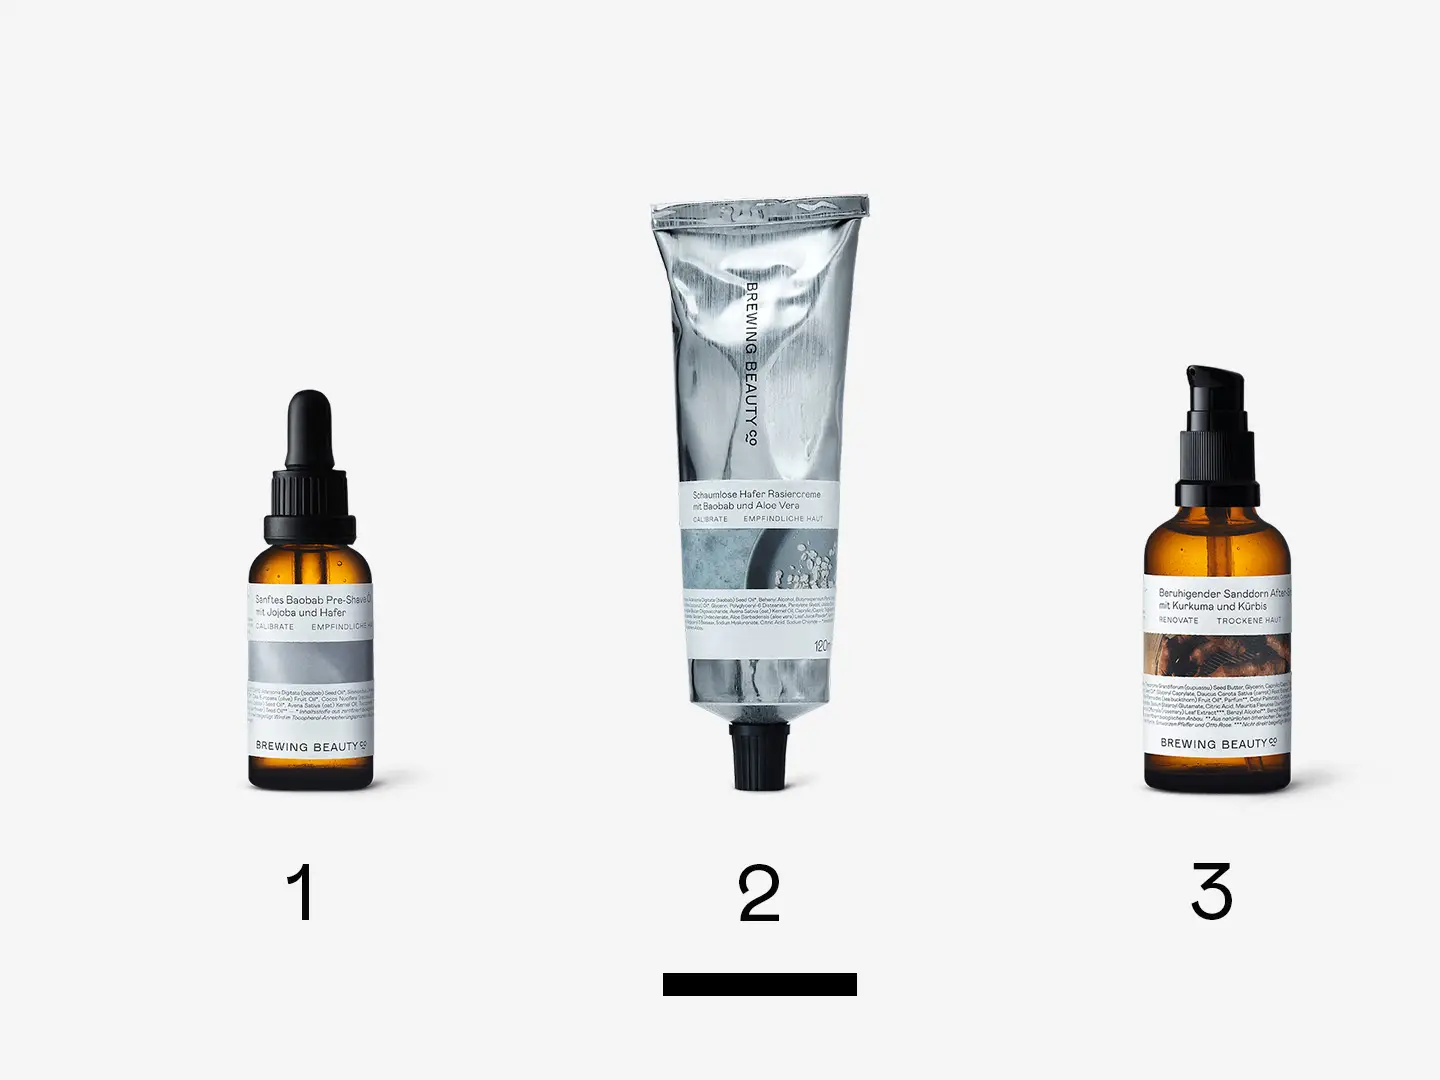 A lineup of Brewing Beauty products representing Routine No.14 